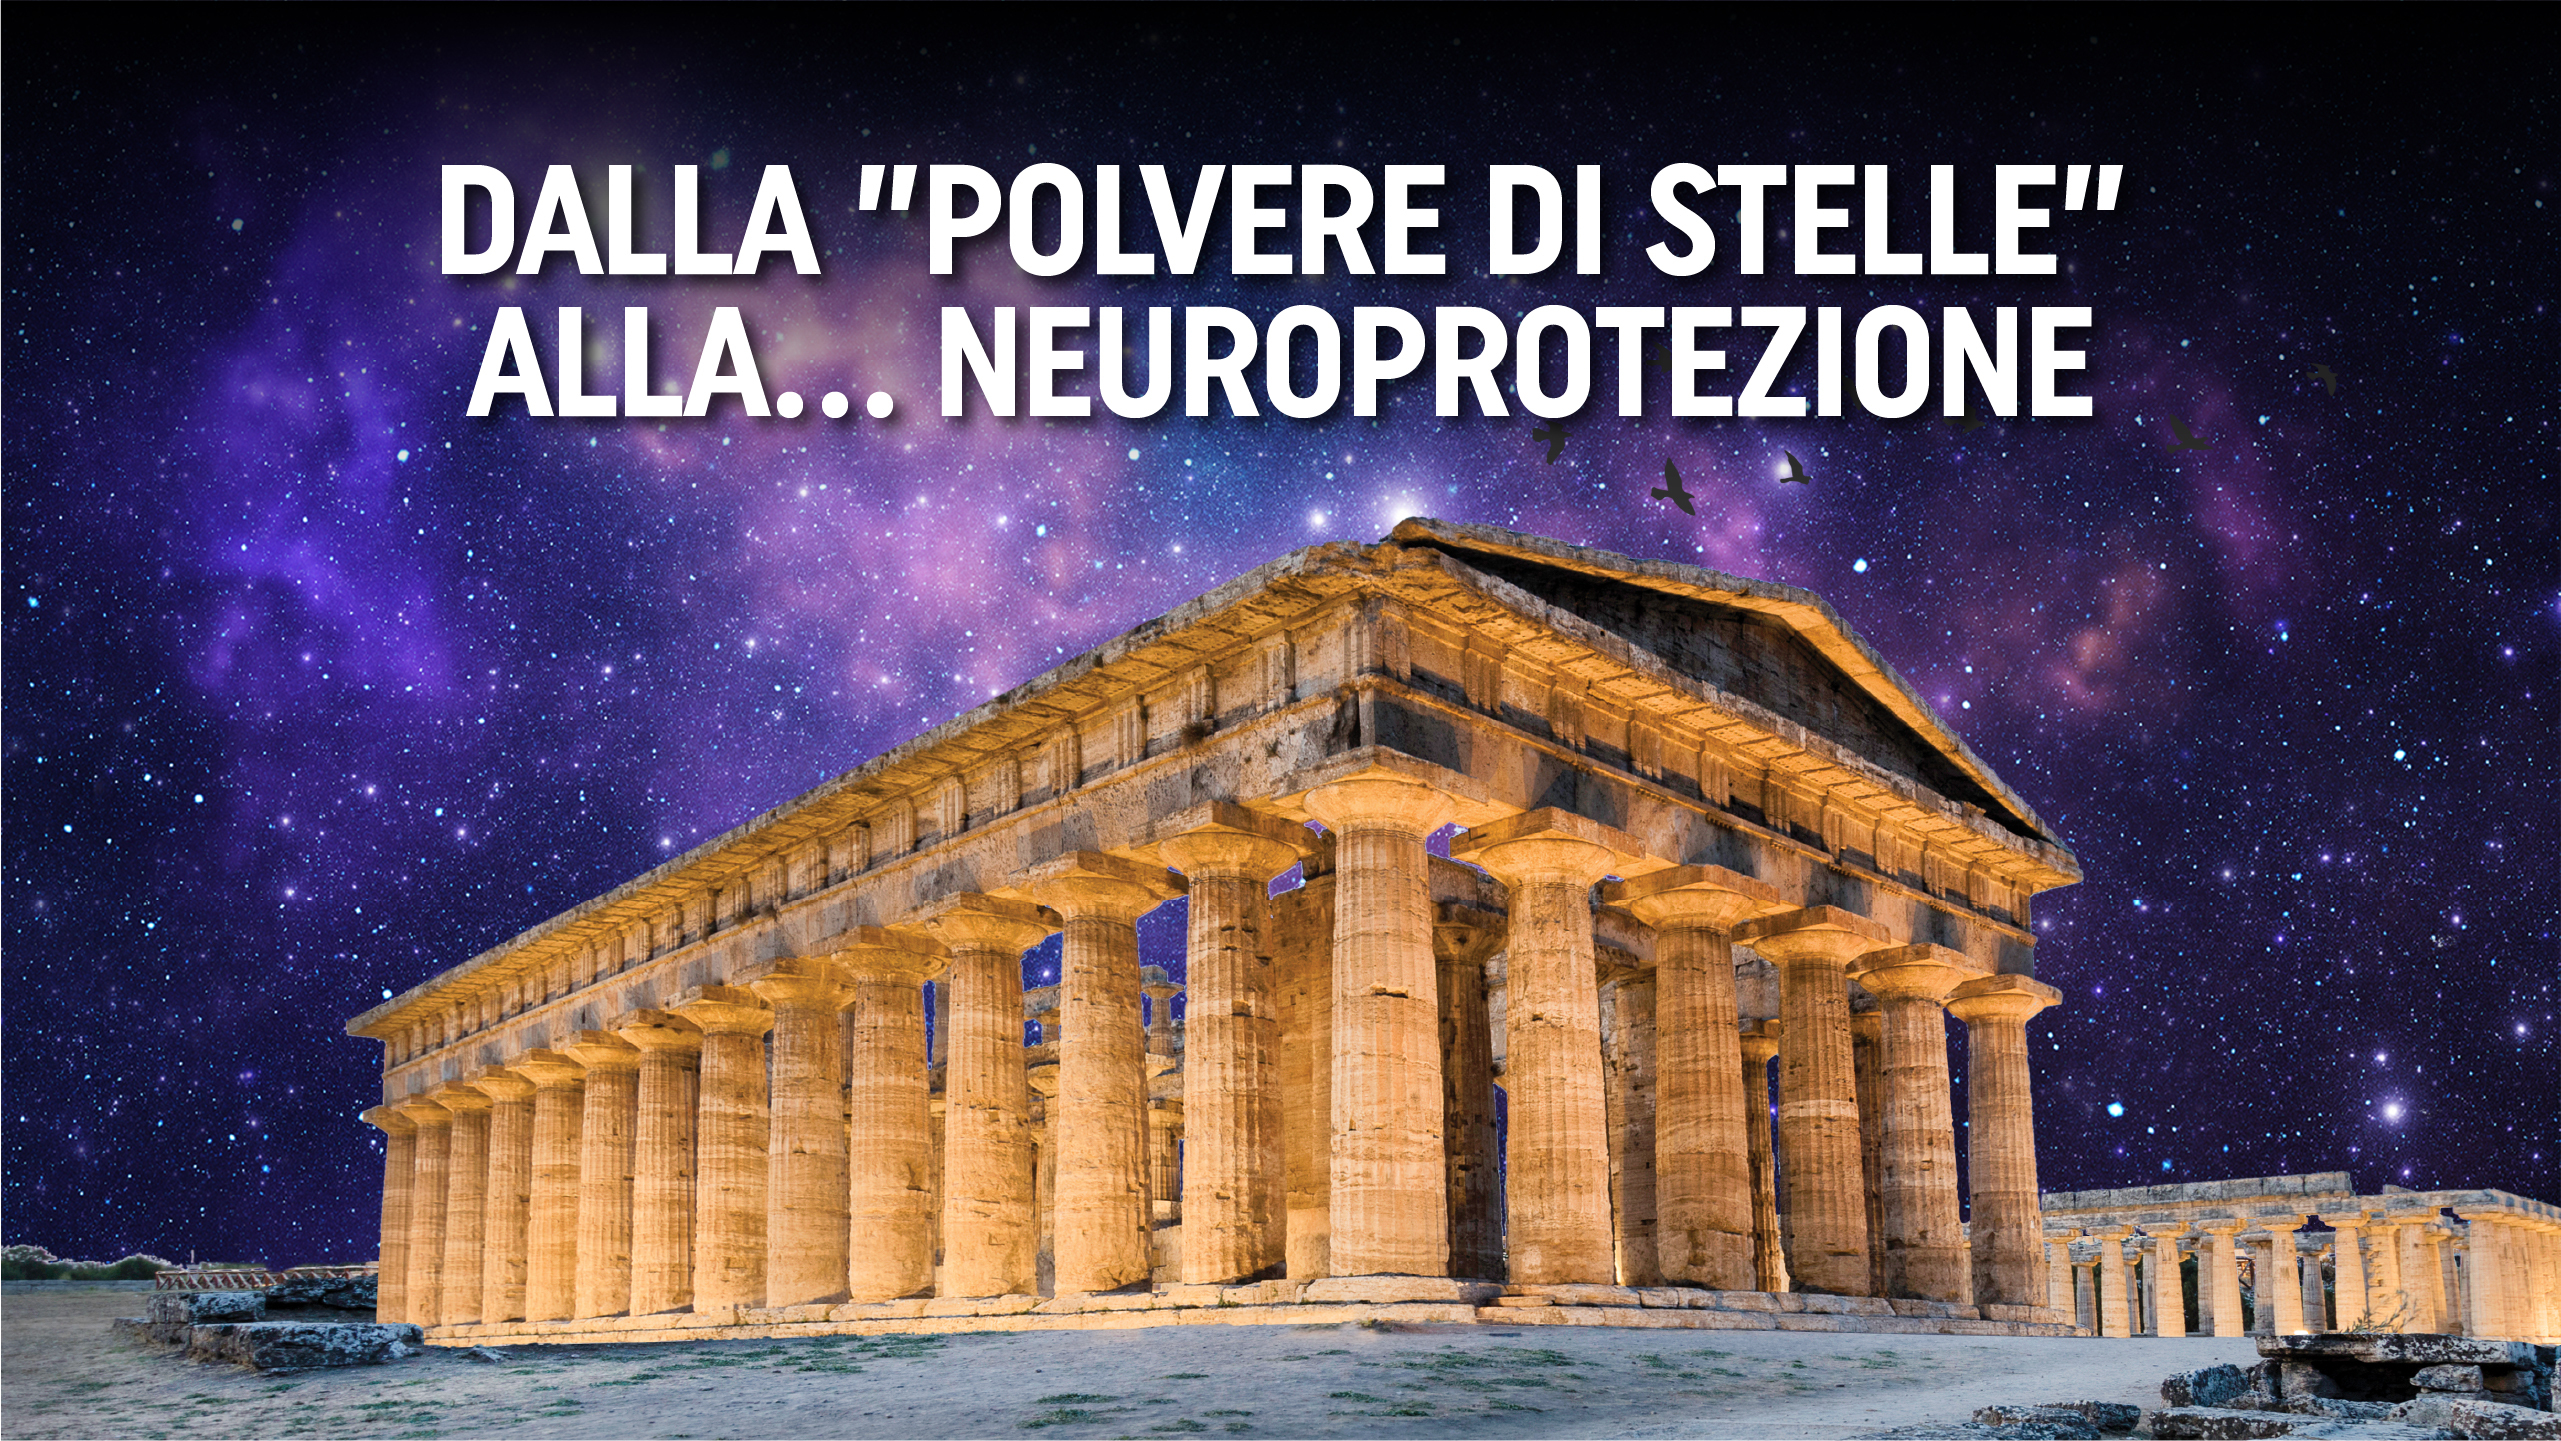 Dalla “polvere di stelle” a… ”ingredient with the best science”